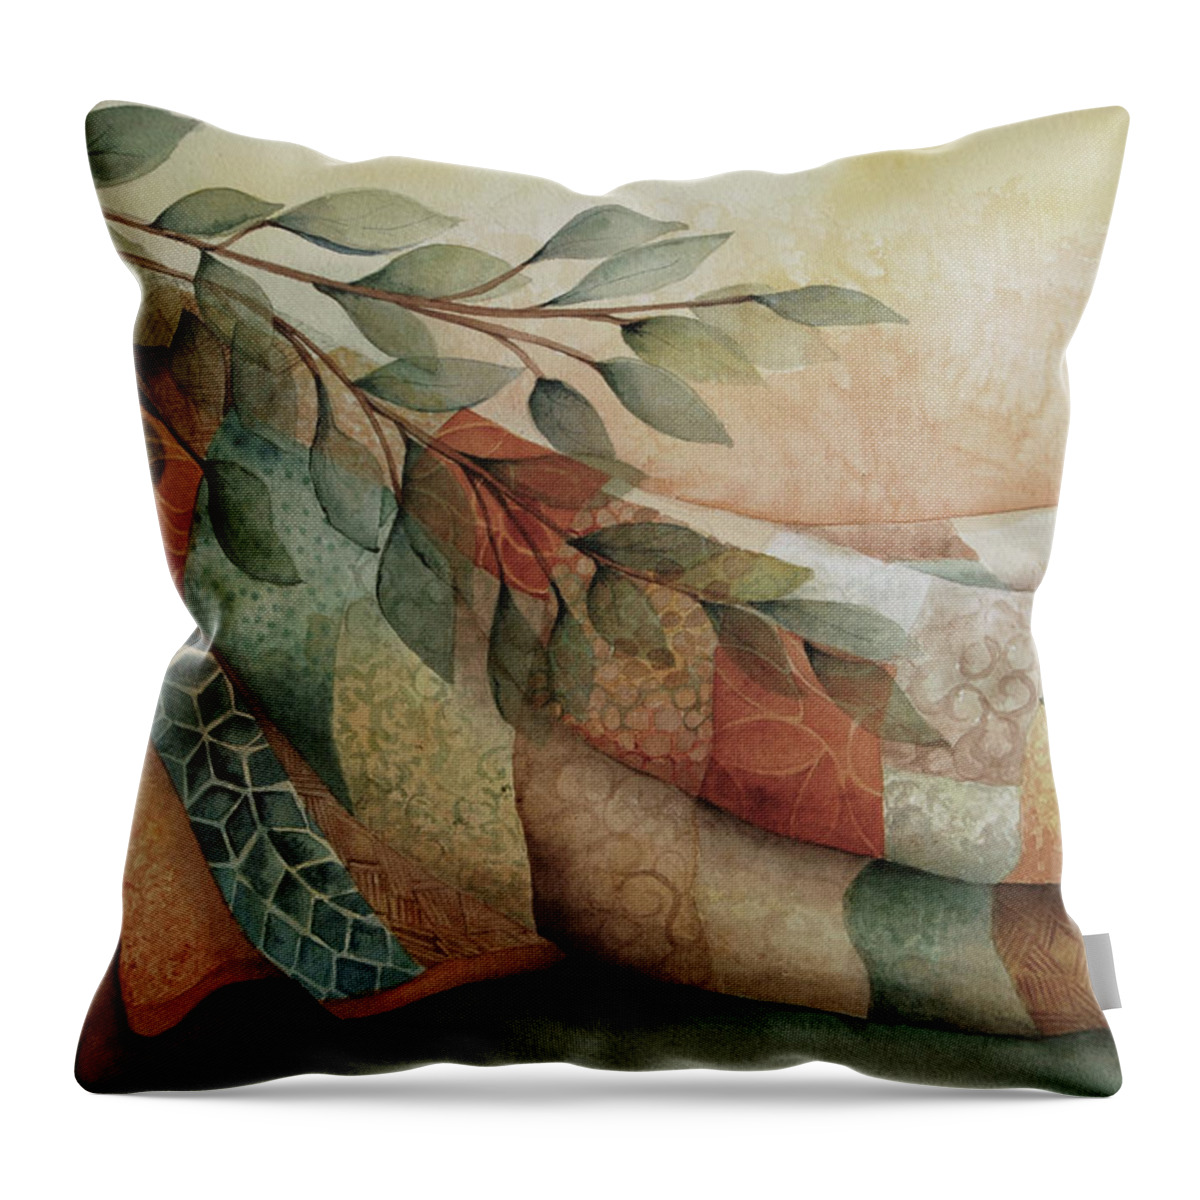 Quilt Throw Pillow featuring the painting Nature Quilt by Lael Rutherford